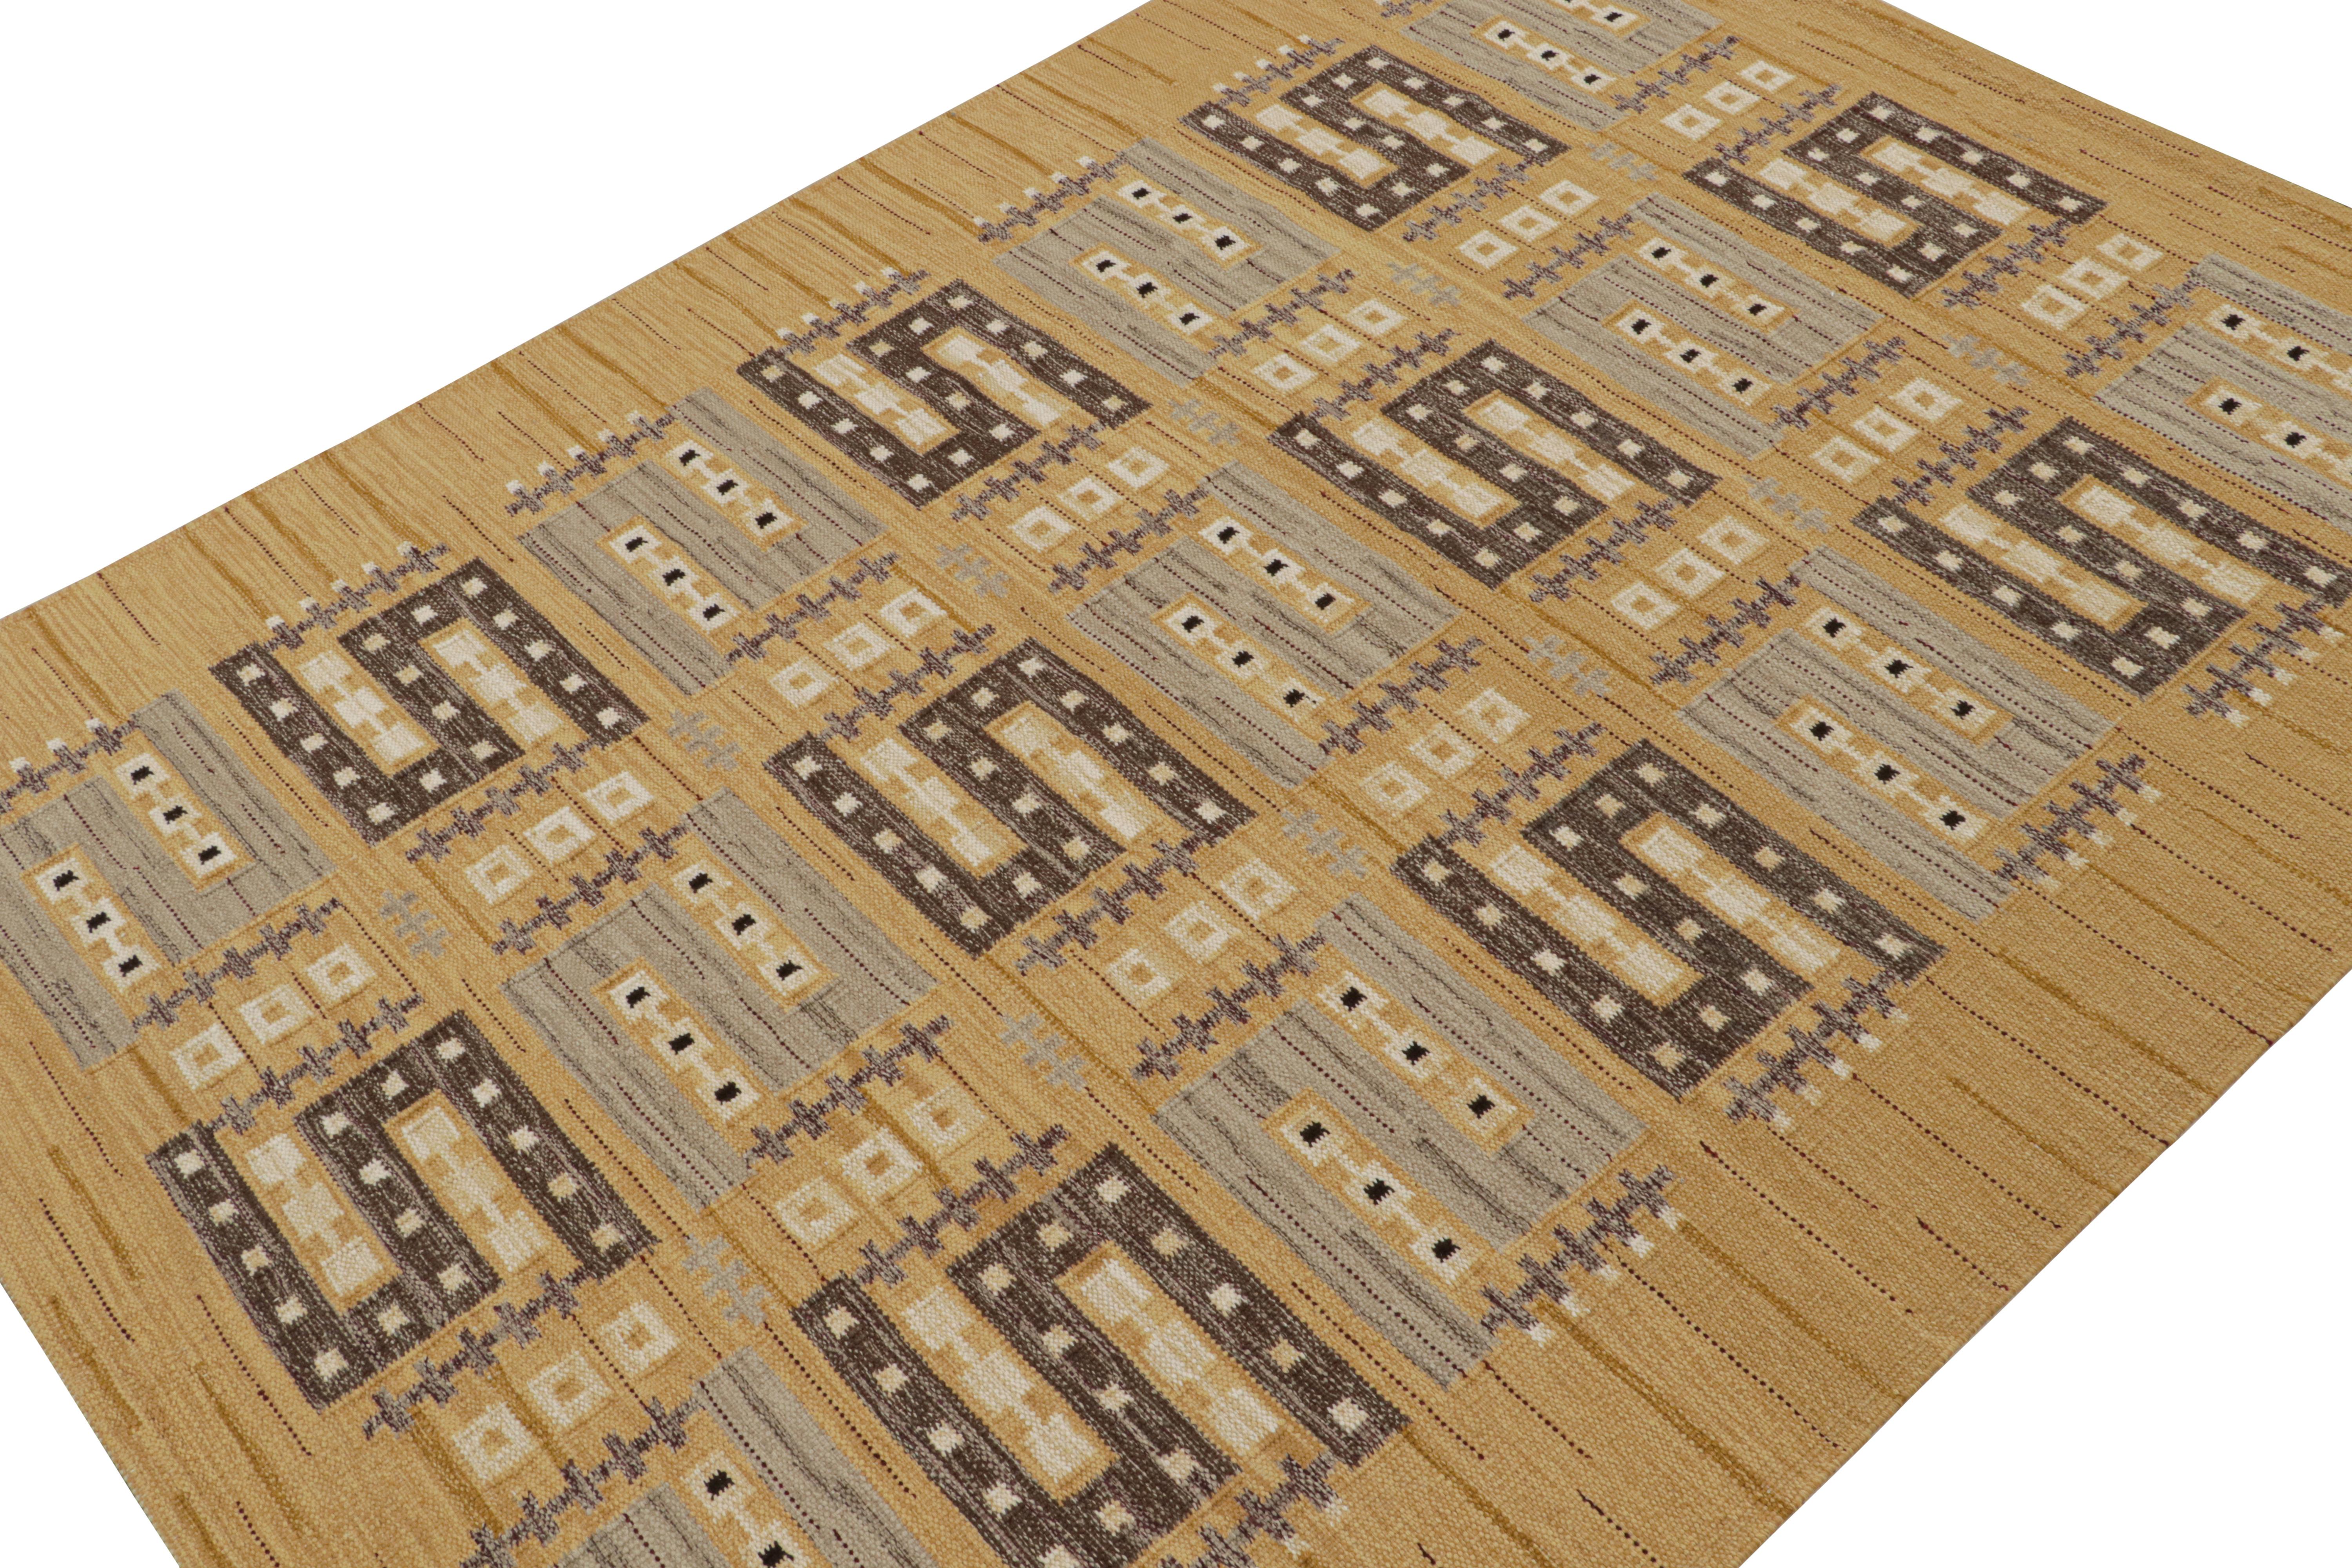 A smart 9x12 Swedish style kilim rug from our award-winning Scandinavian flat weave collection. Handwoven in wool, cotton & undyed natural yarn.

On the Design: 

This rug enjoys geometric patterns in gold & brown. Keen eyes will admire undyed,